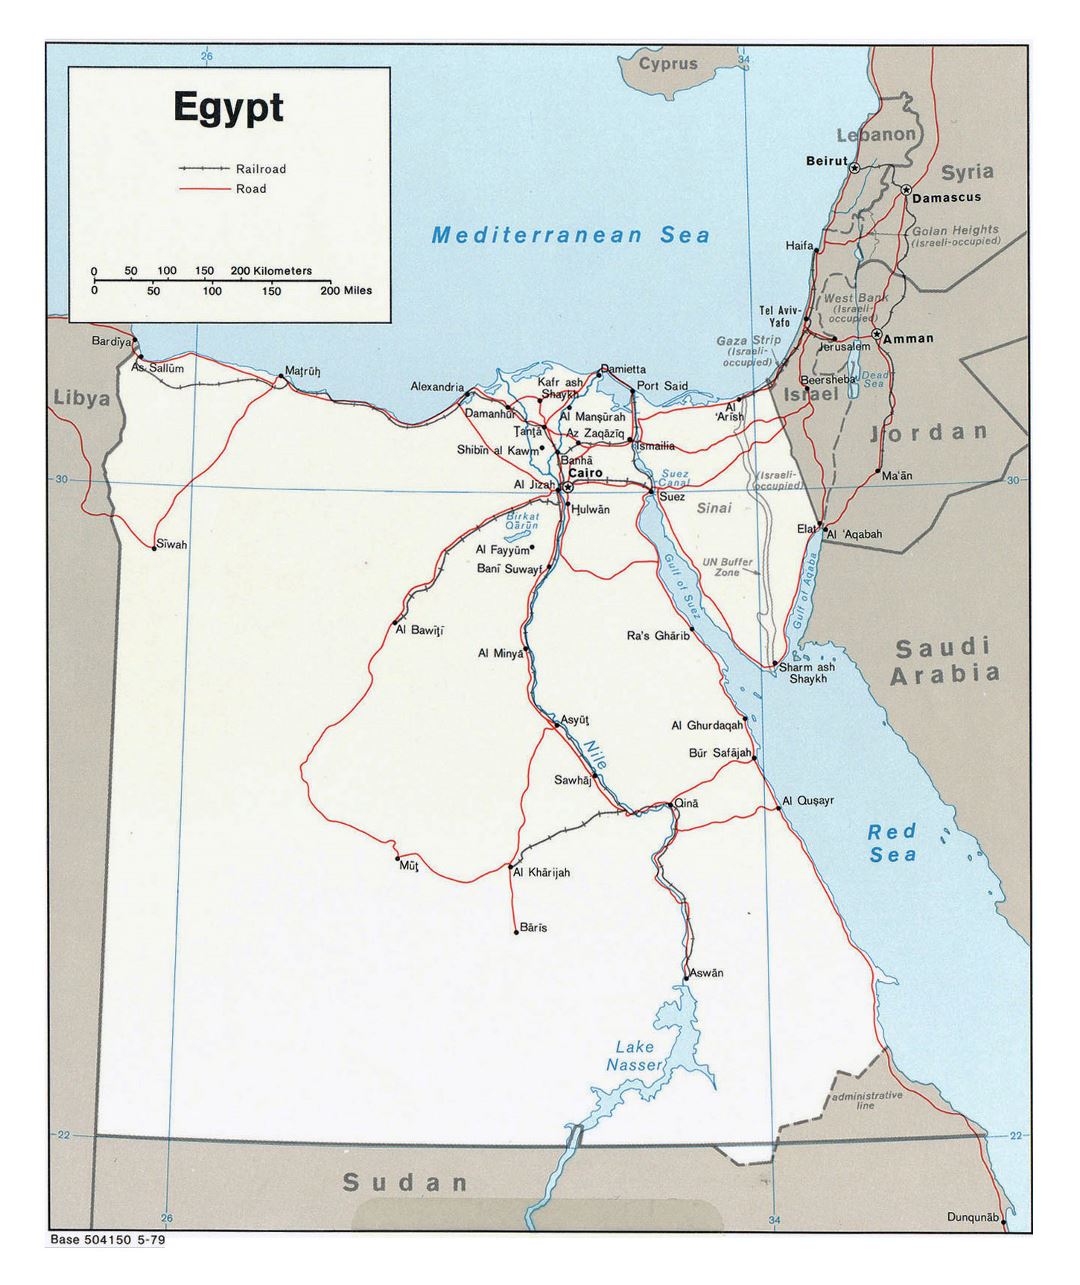 Large political map of Egypt with roads, railroads and major cities - 1979